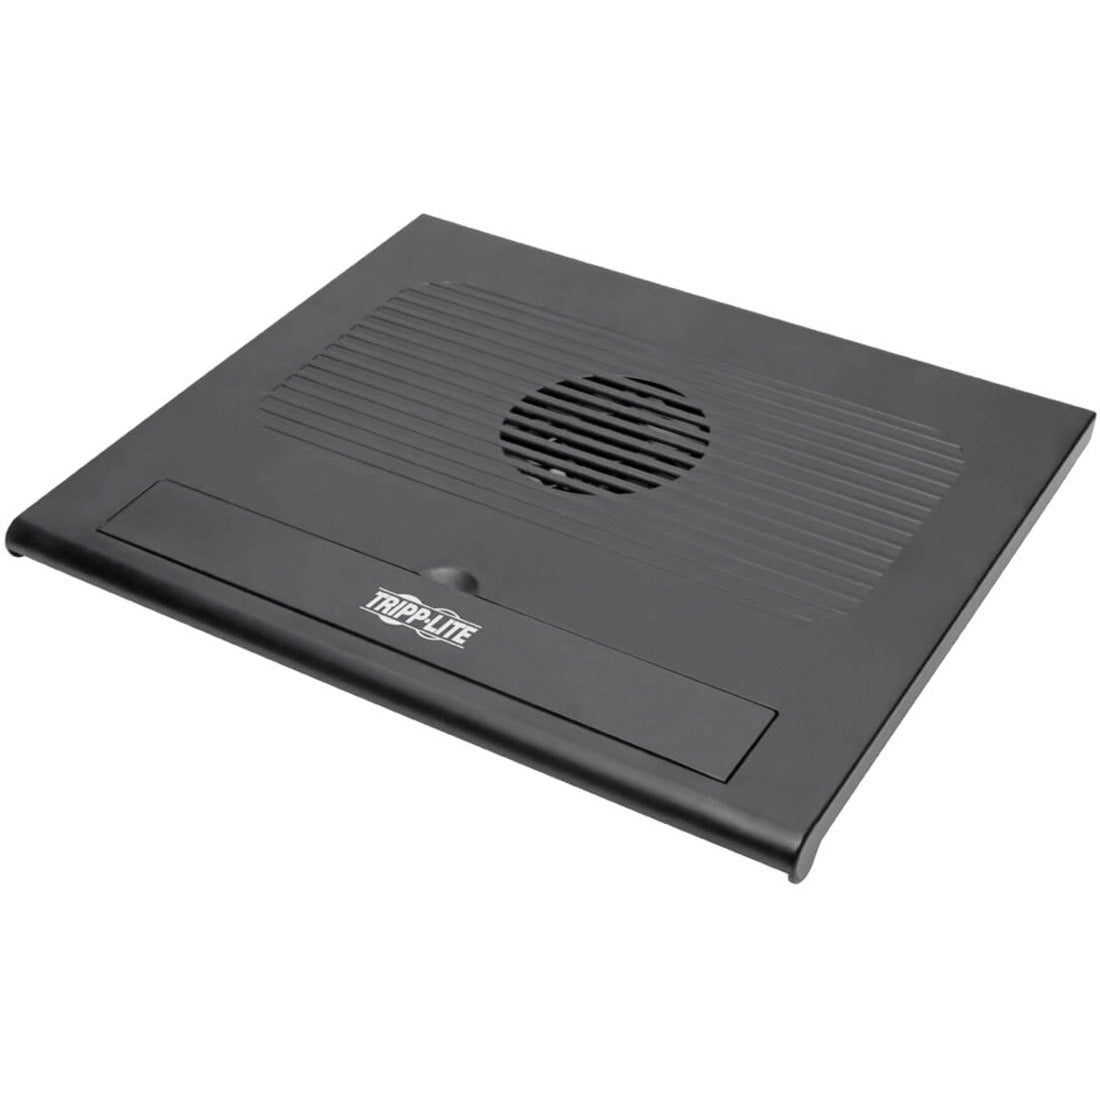 Tripp Lite NC2003SR Notebook Cooling Pad, USB Cooling Stand with 2 Built-in Fans, Portable and TAA Compliant